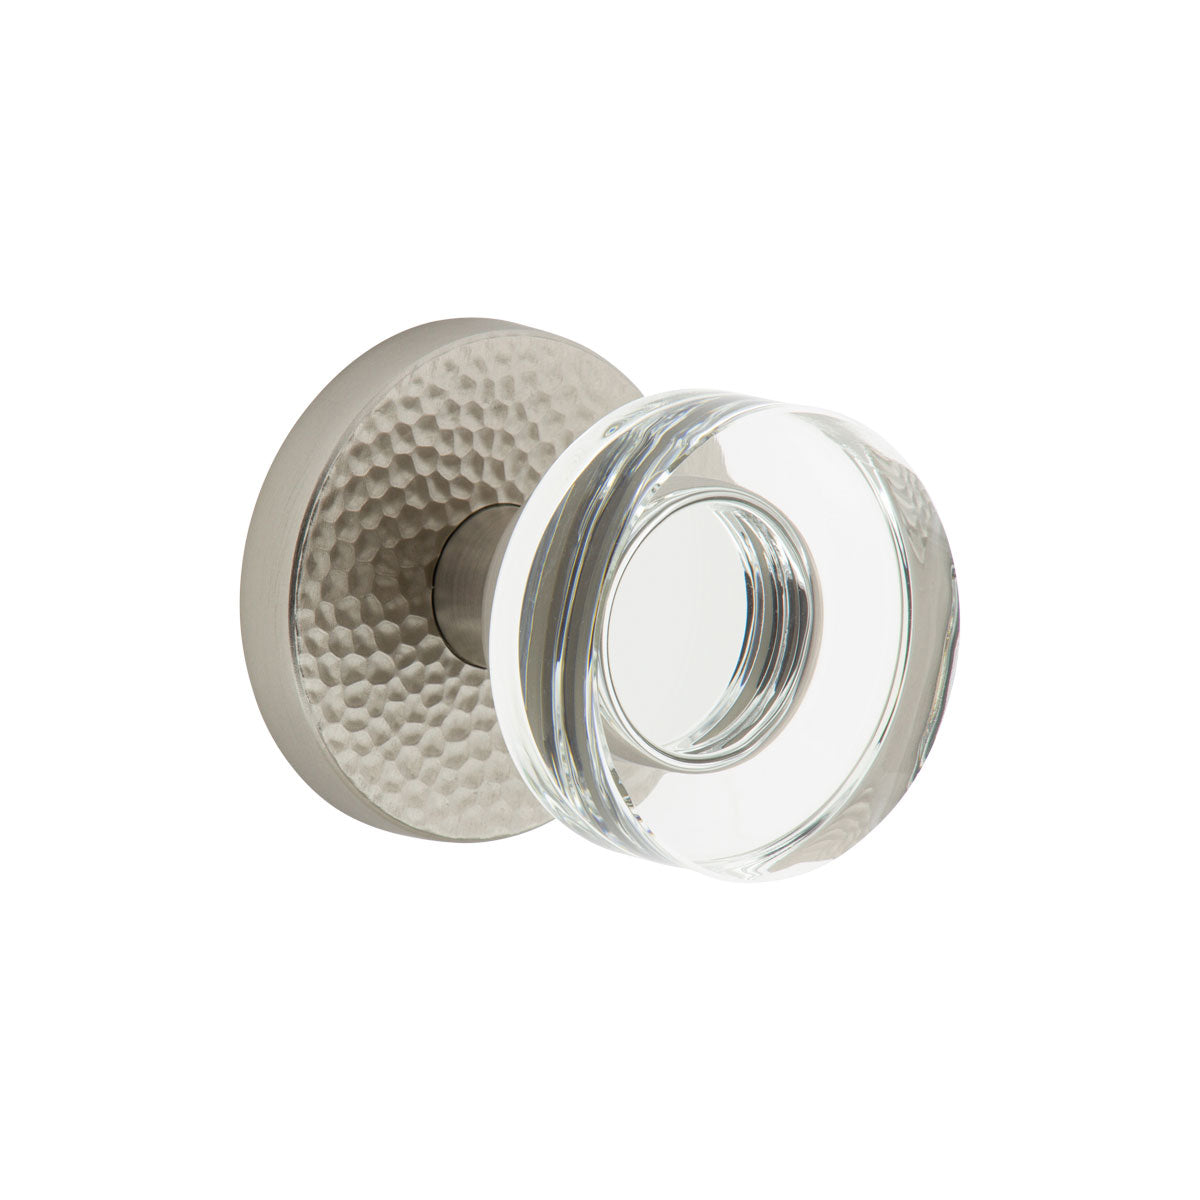 Circolo Hammered Rosette with Circolo Crystal Knob in Satin Nickel